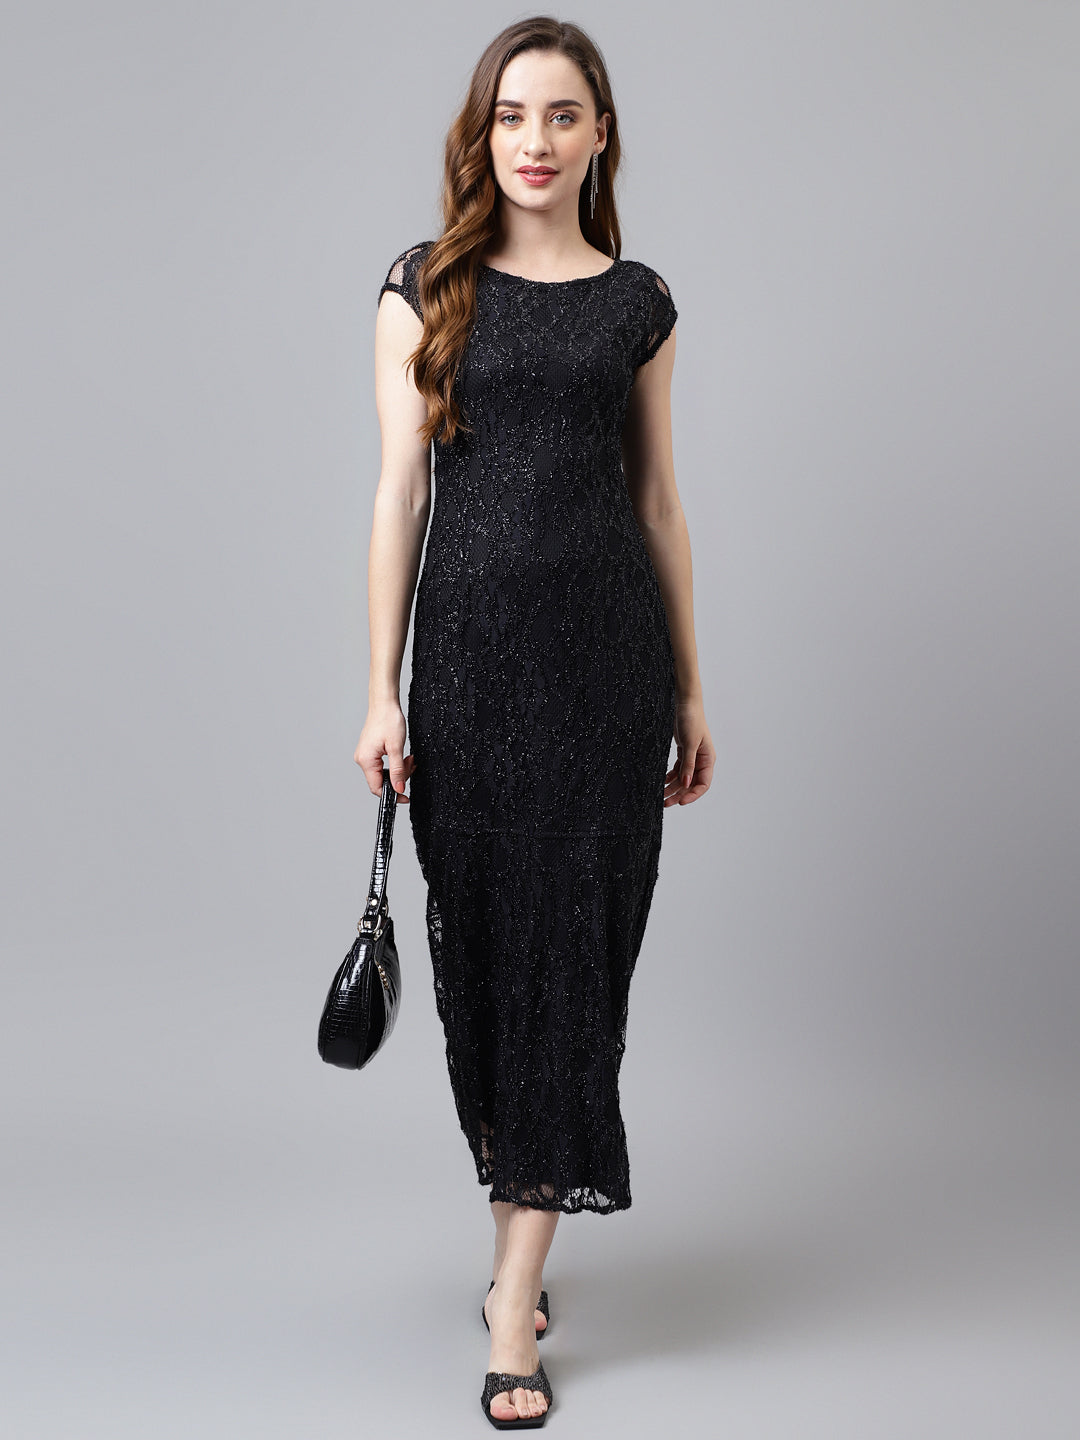 Black Cap Sleeve Round Neck Solid Women Maxi Dress For Party